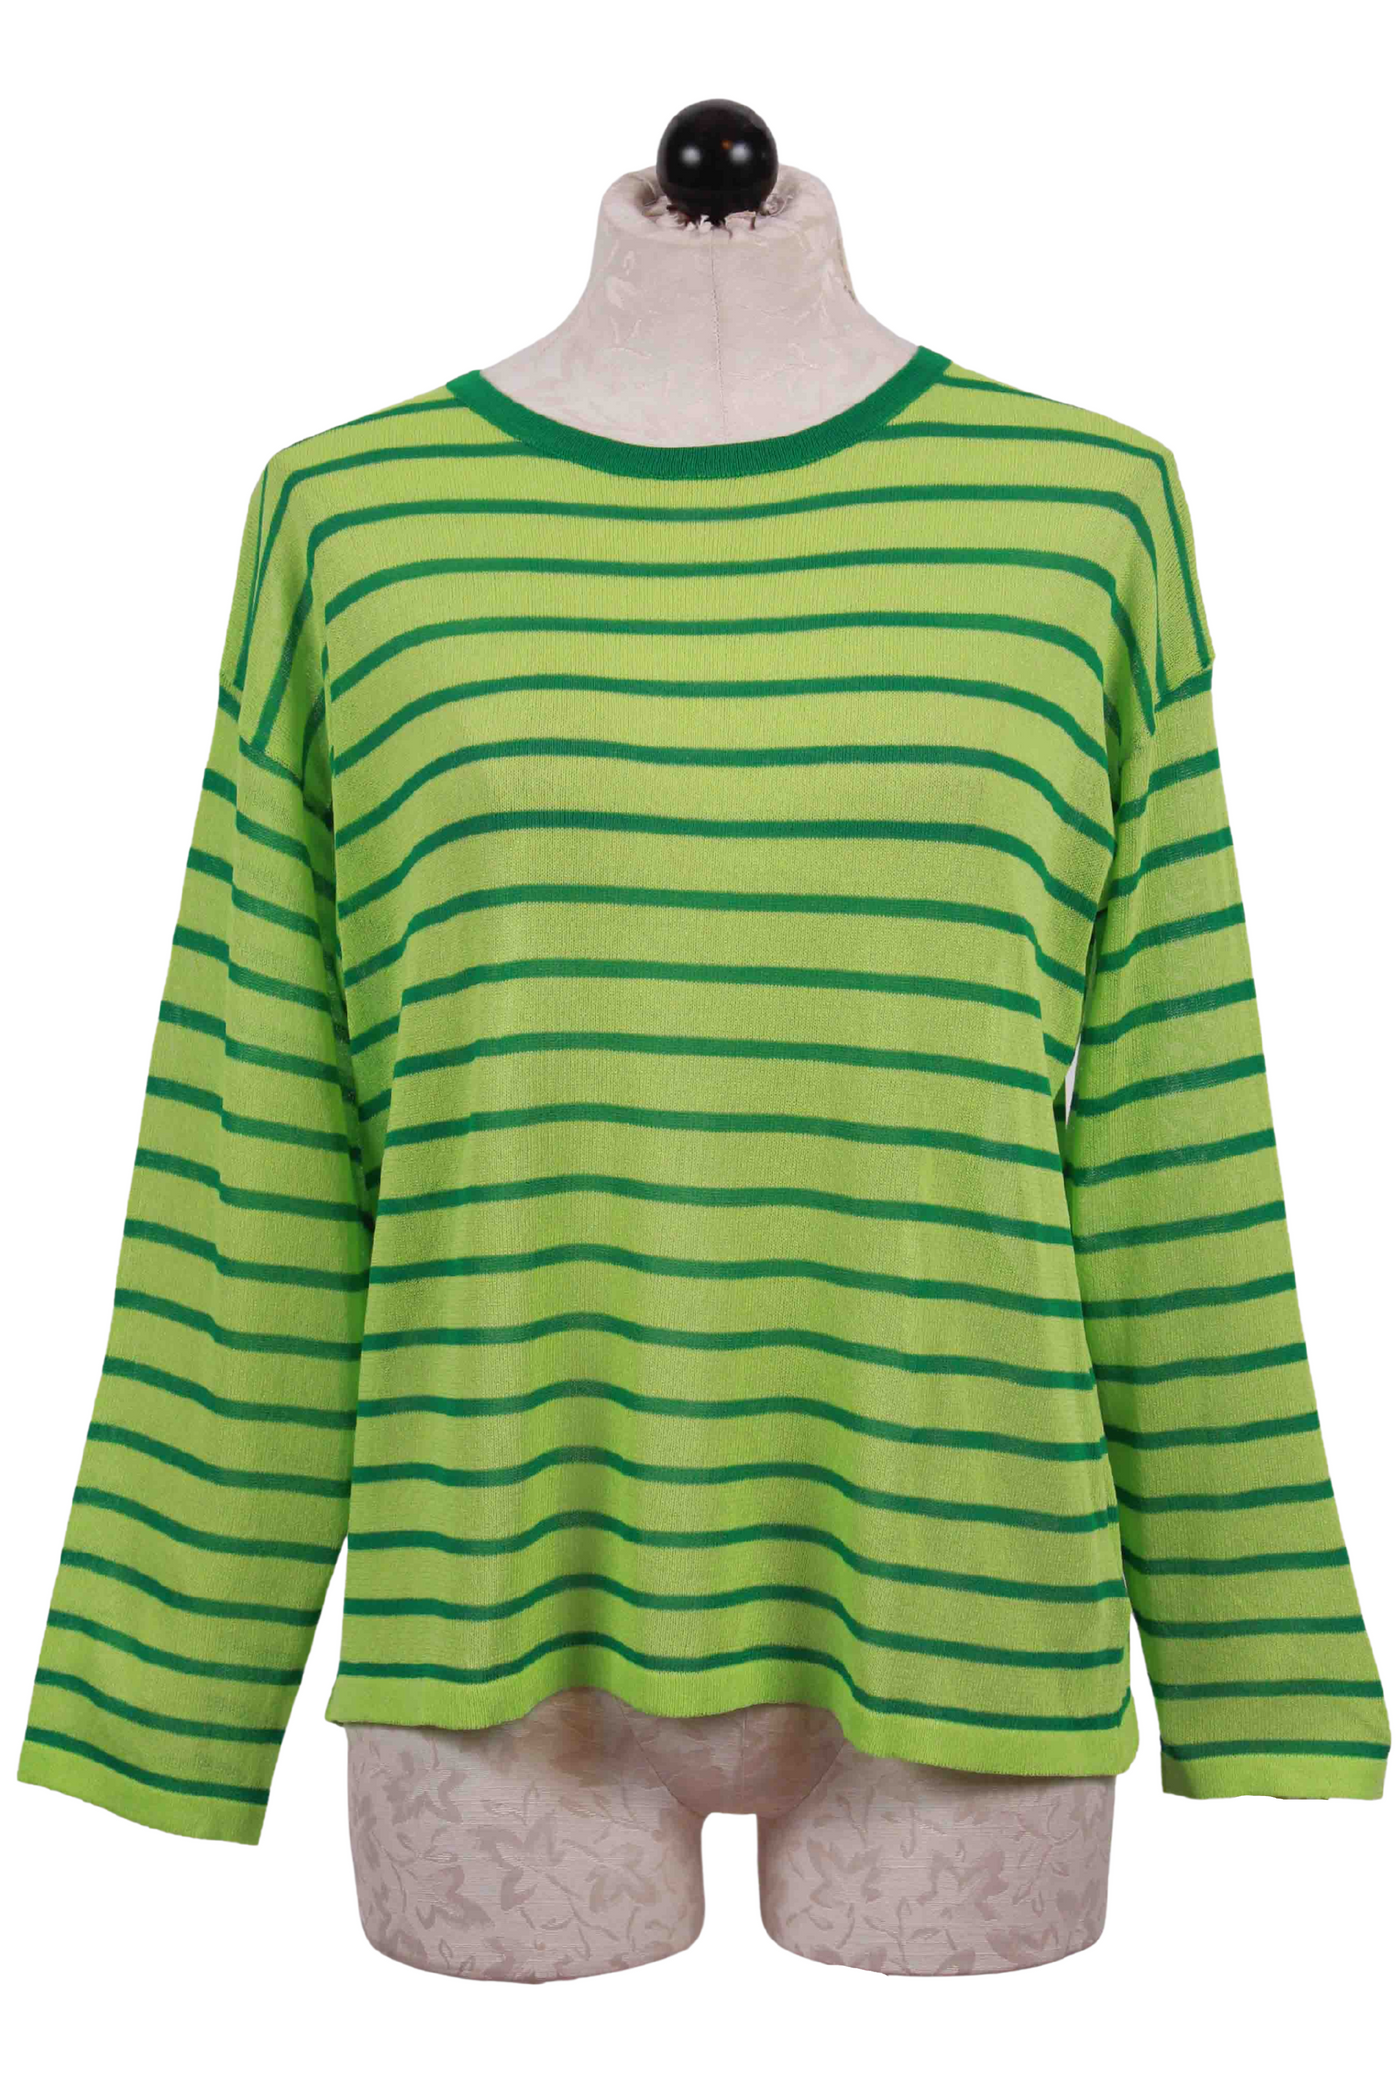 Green Loose Fitting Lightweight Striped Sweater by Compania Fantastica